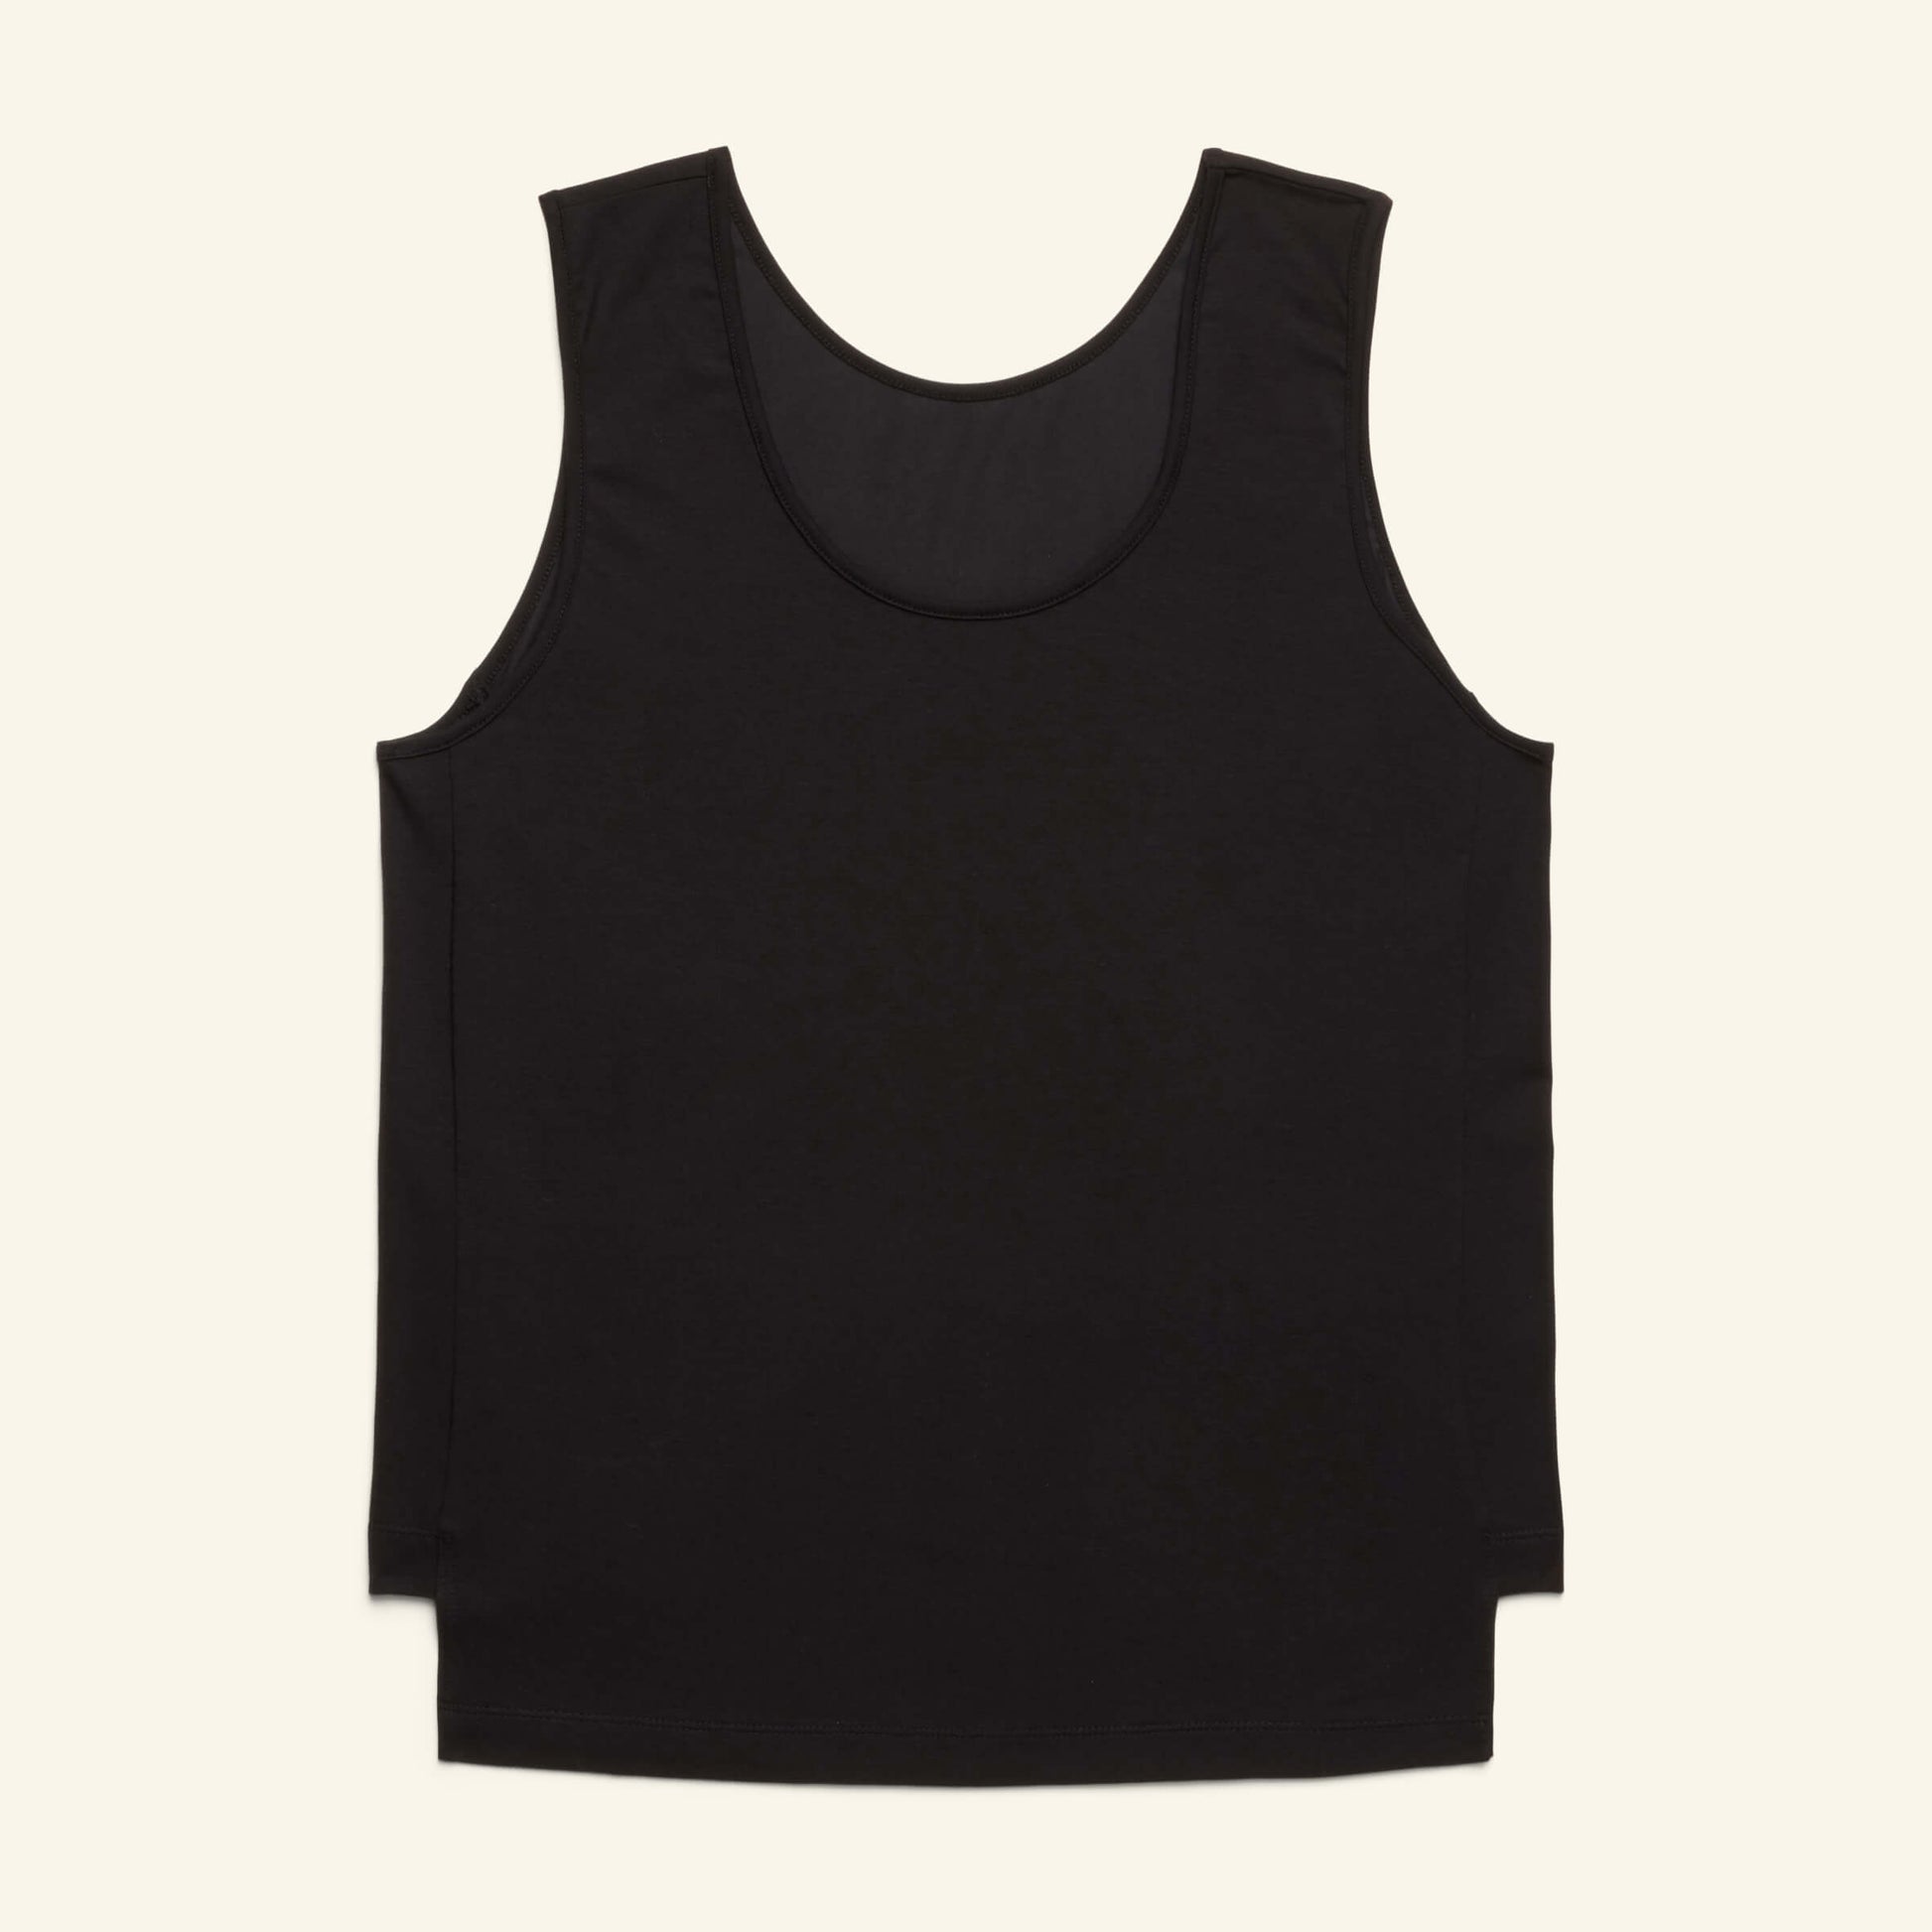 The Slumber Cloud Essential Tank made with Outlast temperature regulation technology